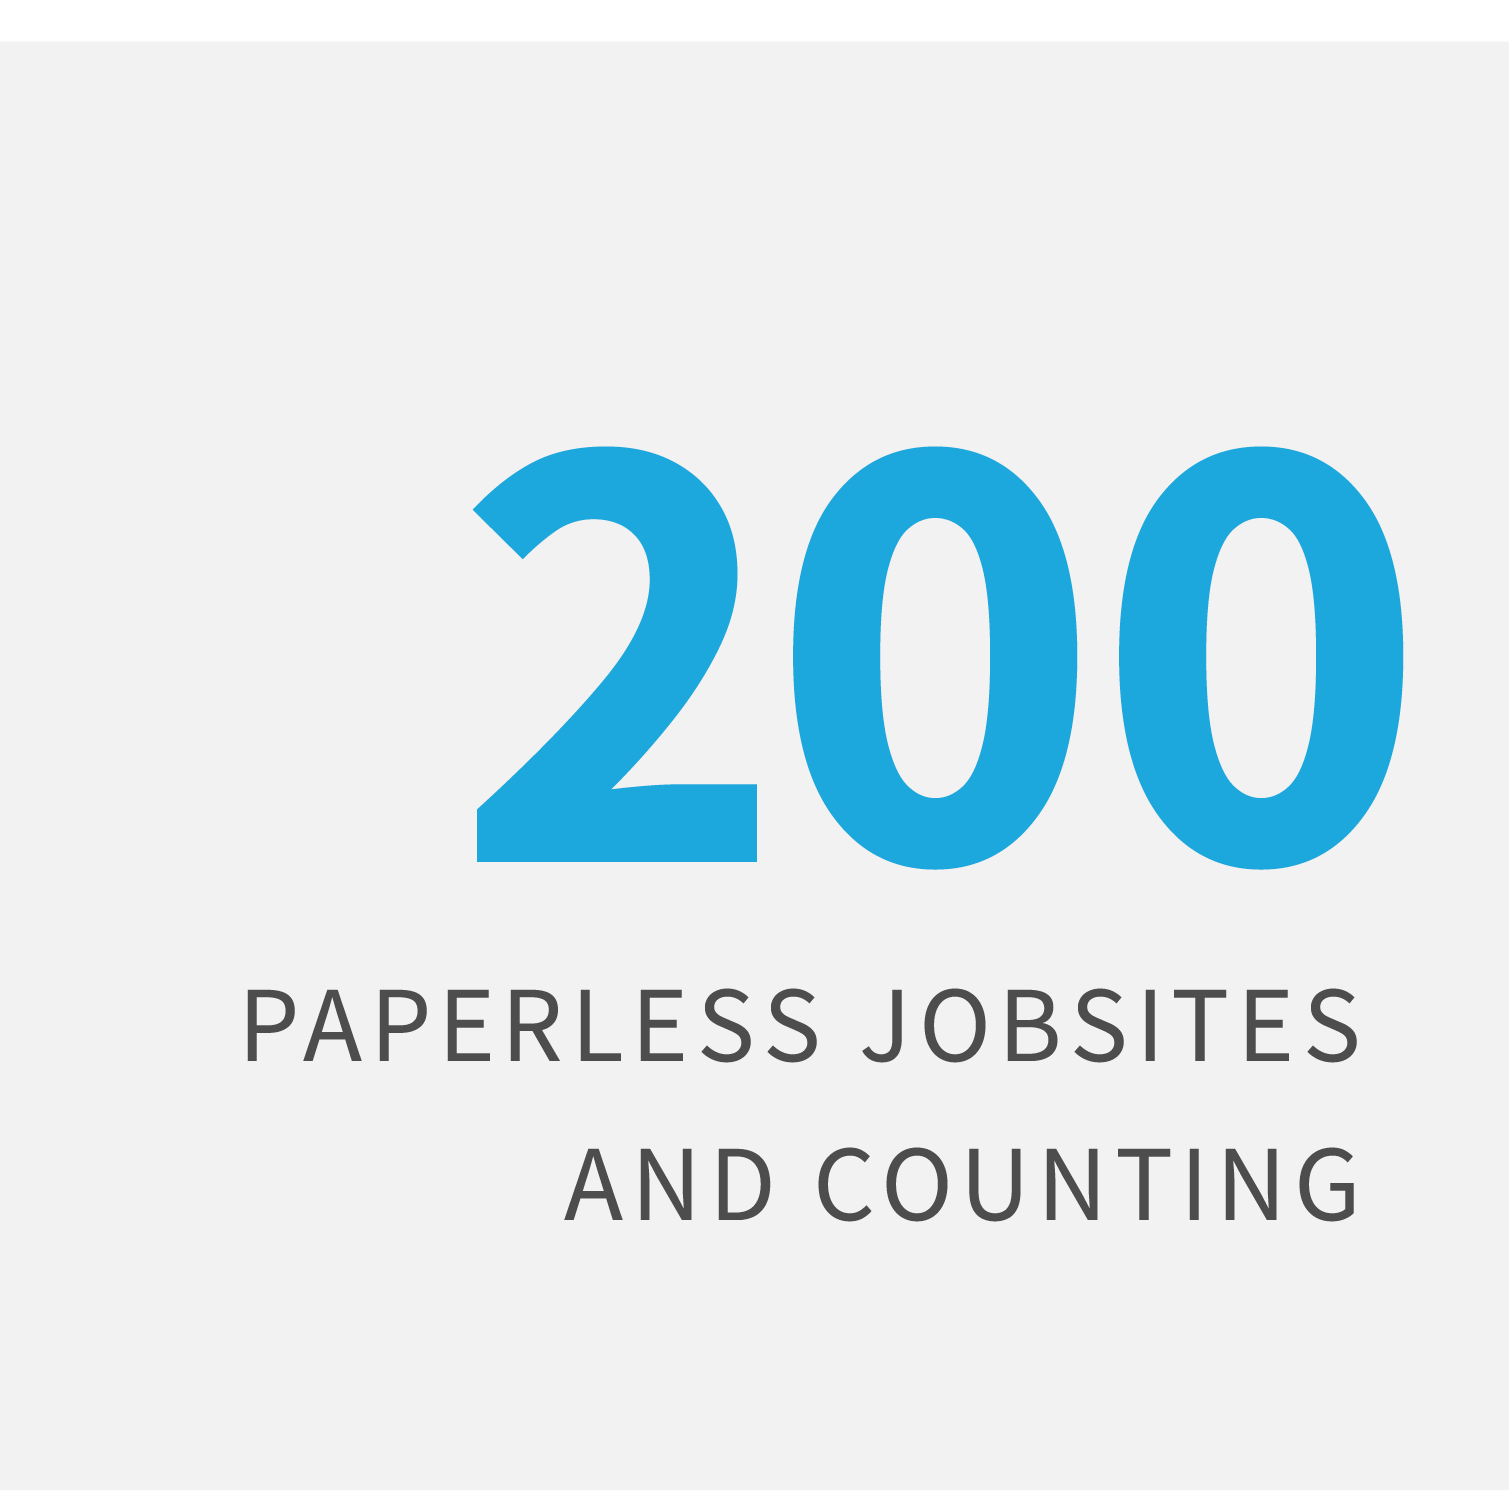 CBG has more than 200 paperless job sites and counting.